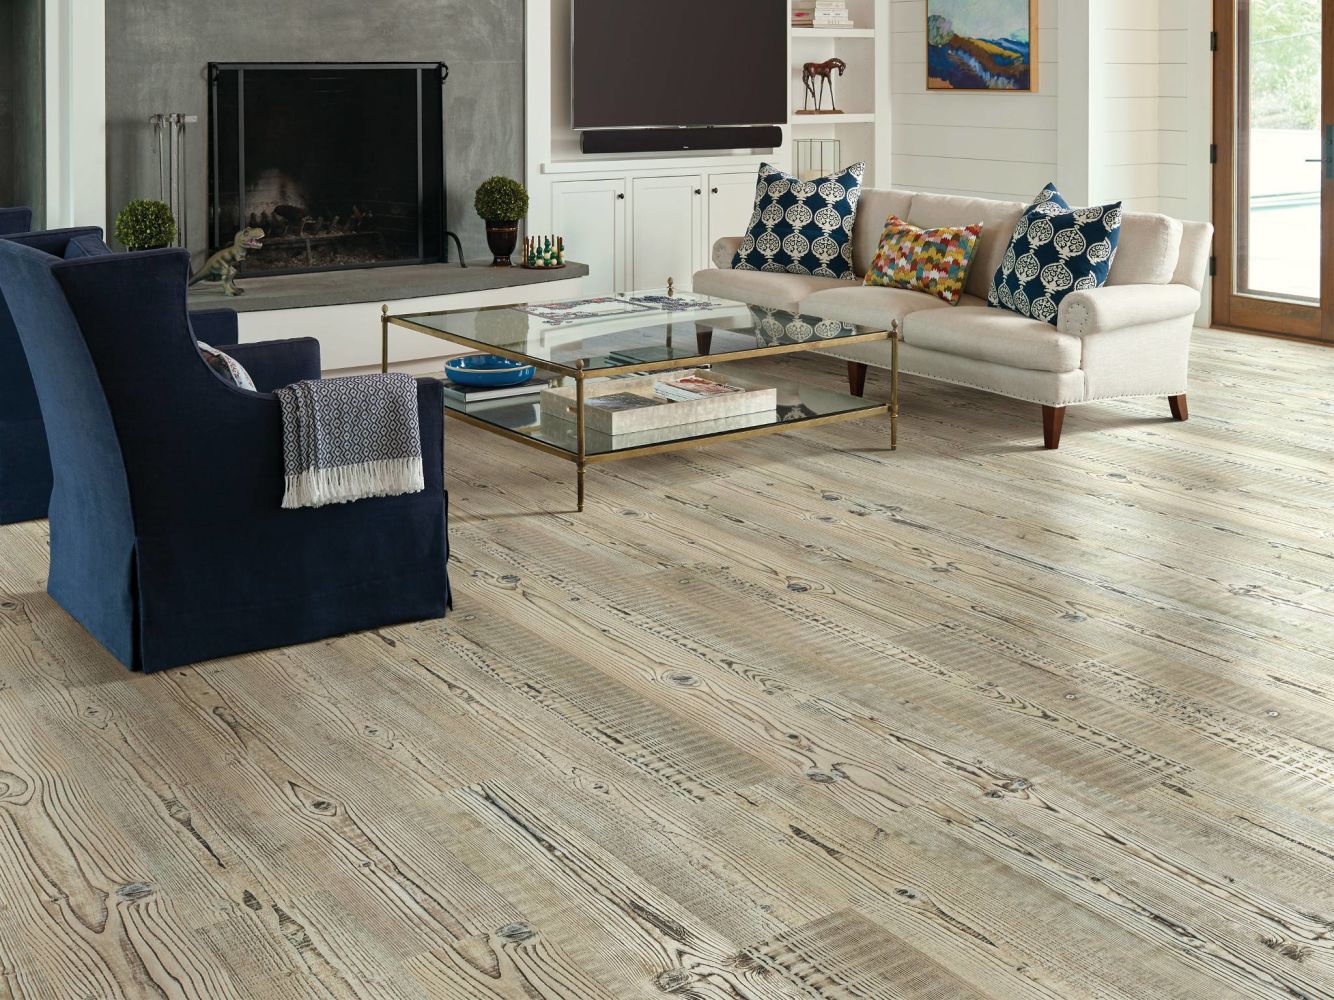 Shaw Floors Everest Willow Plus Accent Pine 07063_D102H